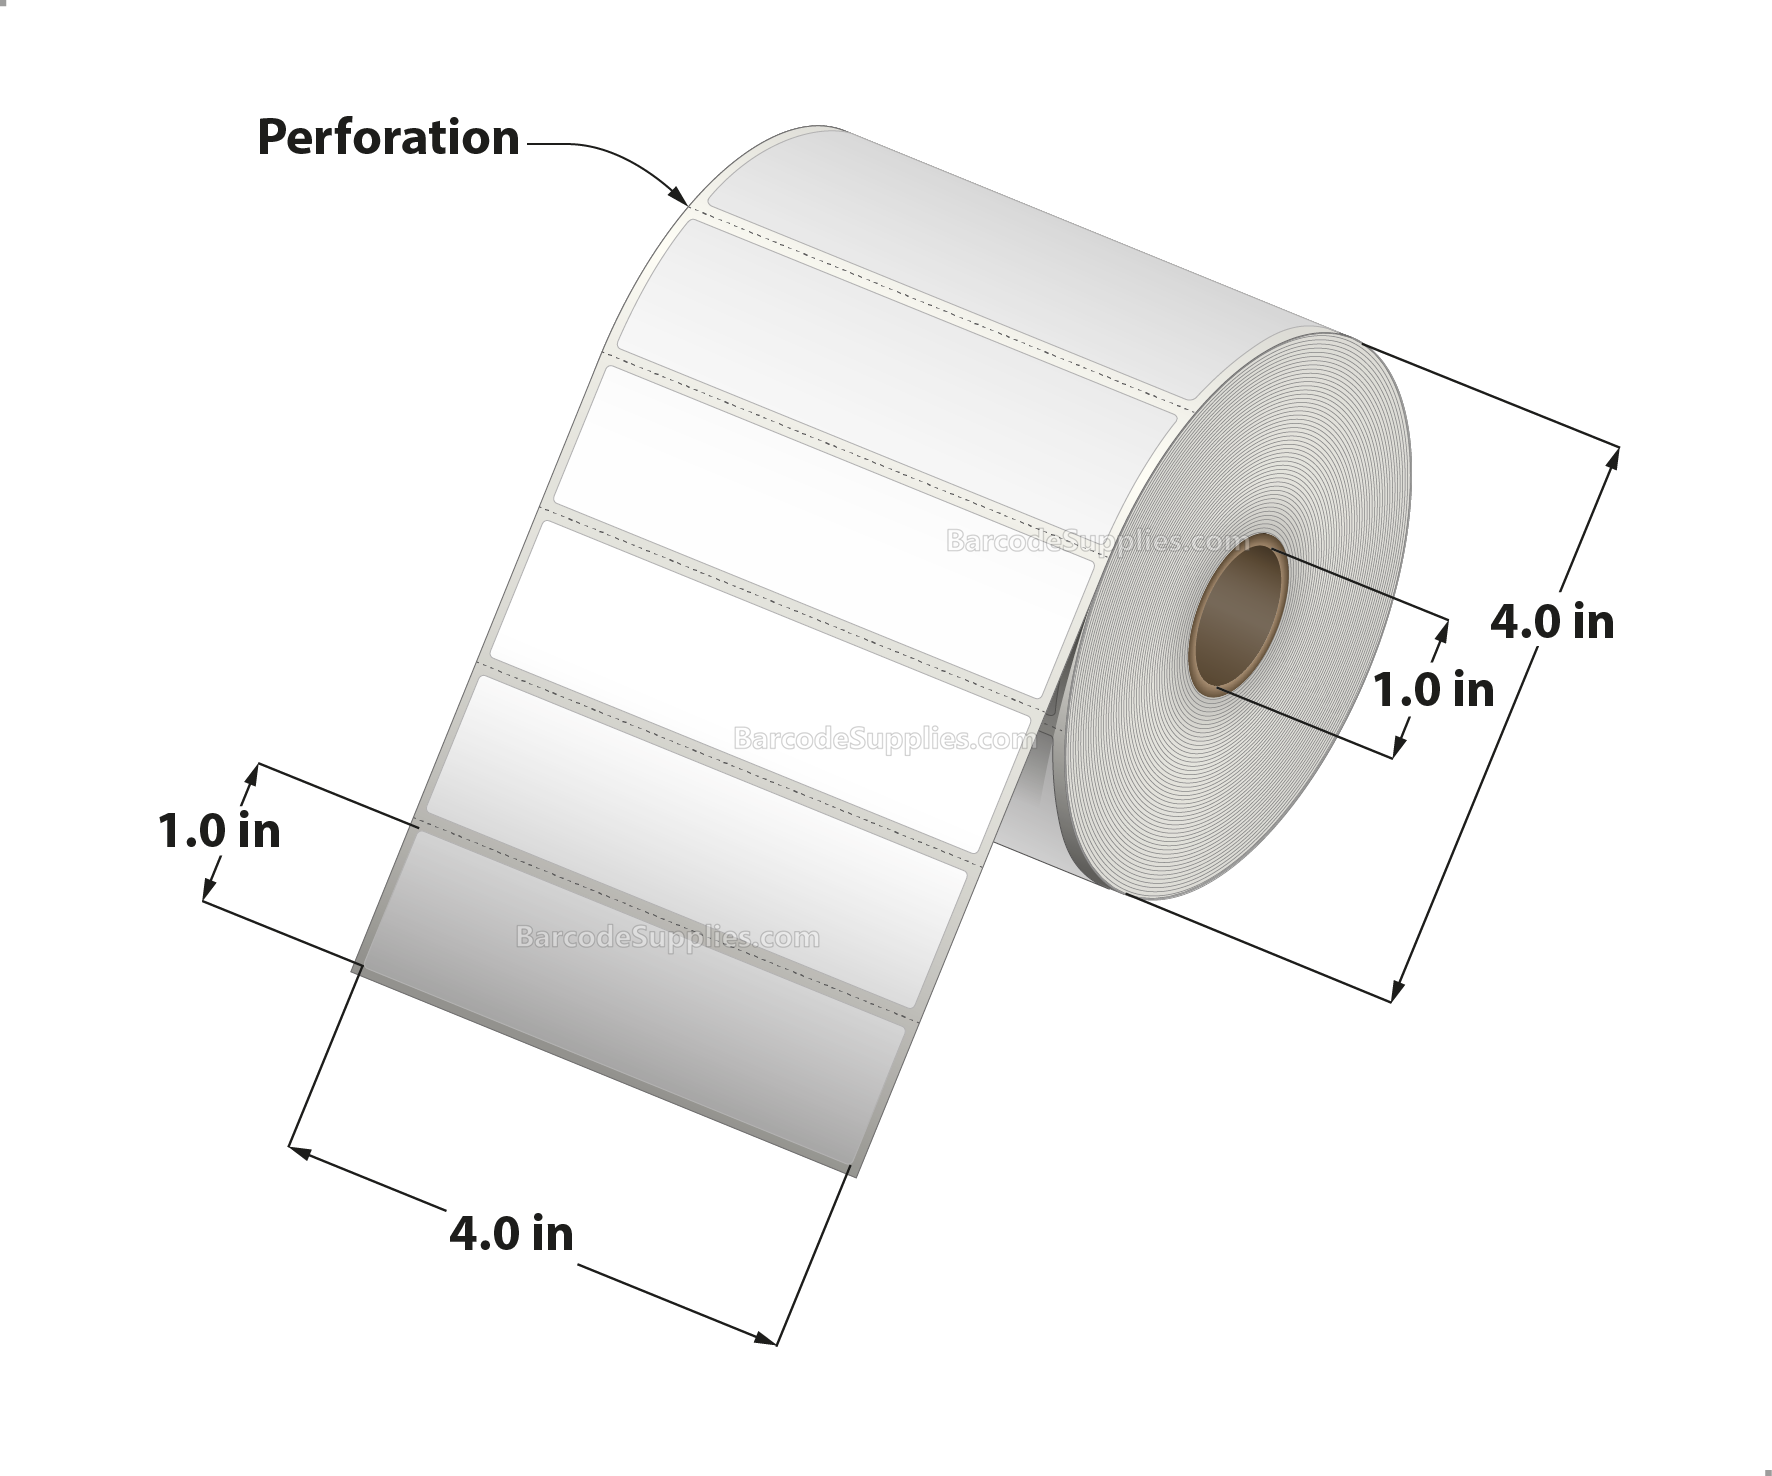 4 x 1 Direct Thermal White Labels With Rubber Adhesive - Perforated - 1310 Labels Per Roll - Carton Of 12 Rolls - 15720 Labels Total - MPN: RDT4-400100-1P